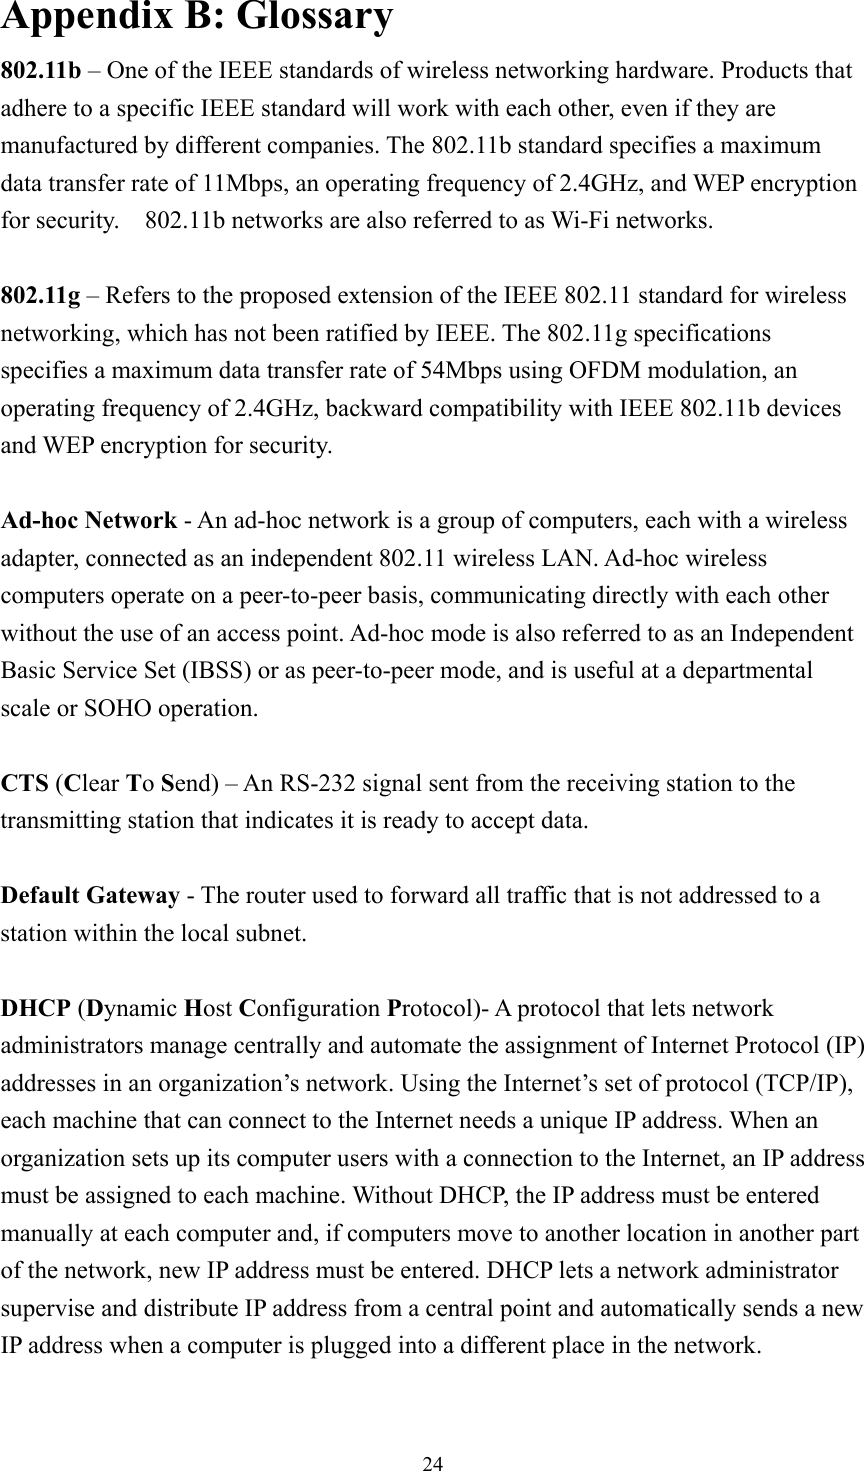  24Appendix B: Glossary 802.11b – One of the IEEE standards of wireless networking hardware. Products that adhere to a specific IEEE standard will work with each other, even if they are manufactured by different companies. The 802.11b standard specifies a maximum data transfer rate of 11Mbps, an operating frequency of 2.4GHz, and WEP encryption for security.    802.11b networks are also referred to as Wi-Fi networks.  802.11g – Refers to the proposed extension of the IEEE 802.11 standard for wireless networking, which has not been ratified by IEEE. The 802.11g specifications   specifies a maximum data transfer rate of 54Mbps using OFDM modulation, an operating frequency of 2.4GHz, backward compatibility with IEEE 802.11b devices and WEP encryption for security.  Ad-hoc Network - An ad-hoc network is a group of computers, each with a wireless adapter, connected as an independent 802.11 wireless LAN. Ad-hoc wireless computers operate on a peer-to-peer basis, communicating directly with each other without the use of an access point. Ad-hoc mode is also referred to as an Independent Basic Service Set (IBSS) or as peer-to-peer mode, and is useful at a departmental scale or SOHO operation.  CTS (Clear To Send) – An RS-232 signal sent from the receiving station to the transmitting station that indicates it is ready to accept data.  Default Gateway - The router used to forward all traffic that is not addressed to a station within the local subnet.  DHCP (Dynamic Host Configuration Protocol)- A protocol that lets network administrators manage centrally and automate the assignment of Internet Protocol (IP) addresses in an organization’s network. Using the Internet’s set of protocol (TCP/IP), each machine that can connect to the Internet needs a unique IP address. When an organization sets up its computer users with a connection to the Internet, an IP address must be assigned to each machine. Without DHCP, the IP address must be entered manually at each computer and, if computers move to another location in another part of the network, new IP address must be entered. DHCP lets a network administrator supervise and distribute IP address from a central point and automatically sends a new IP address when a computer is plugged into a different place in the network.  